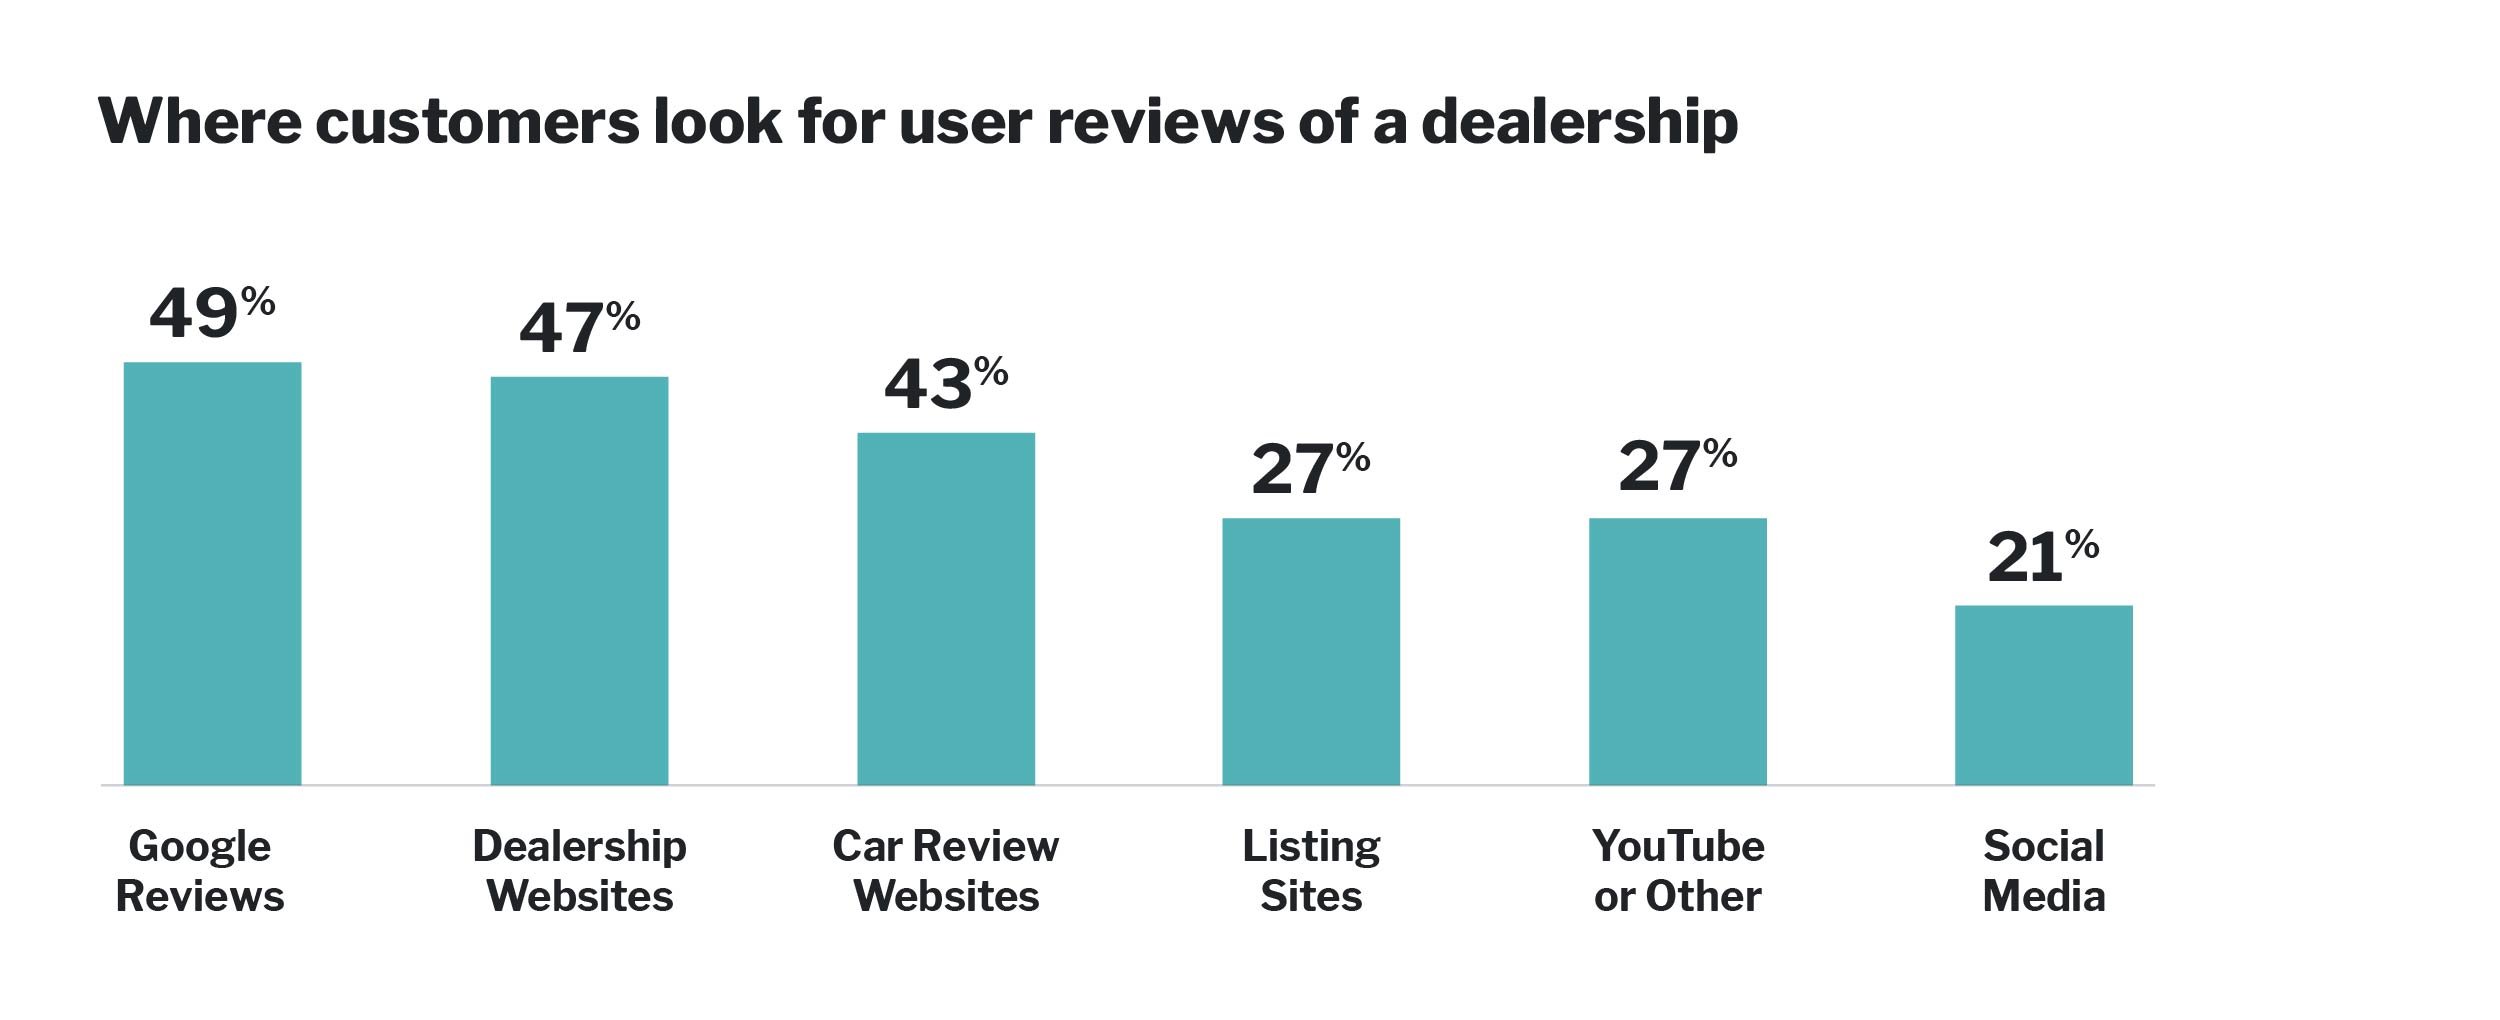 A bar chart showing where used cr buyers look for reviews online. Google 49%, Dealership websites 47%, Car review websites 43%, Listing sites 27%, YouTube 27%, Social media 21%.